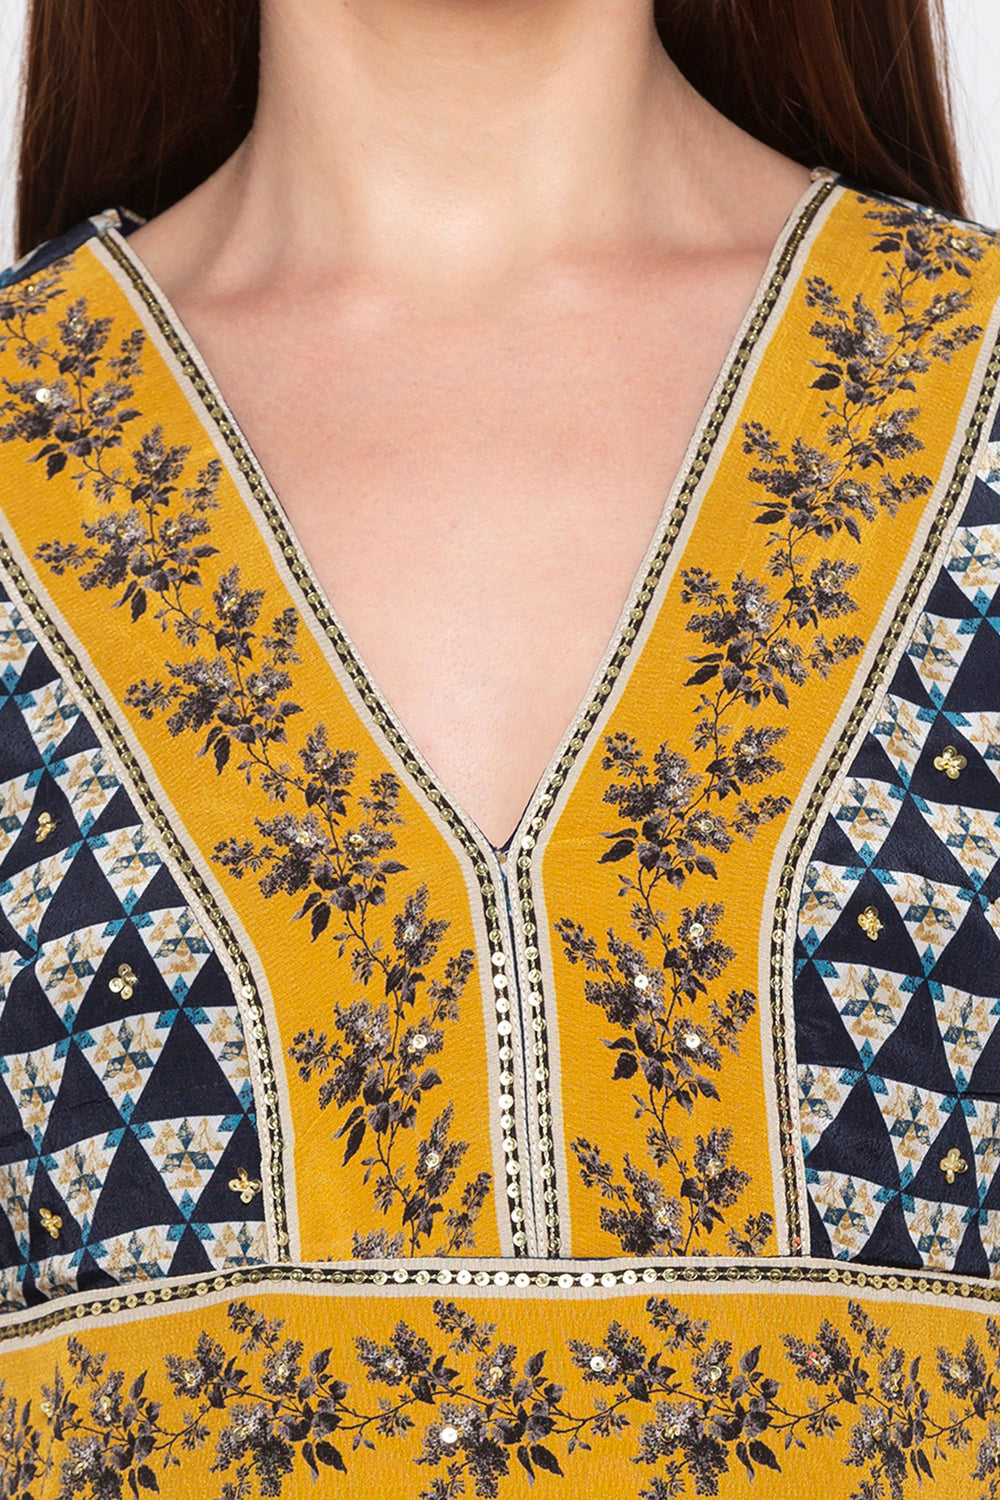 Printed Jumpsuit Highlighted With Embroidery On The Neckline And Waist